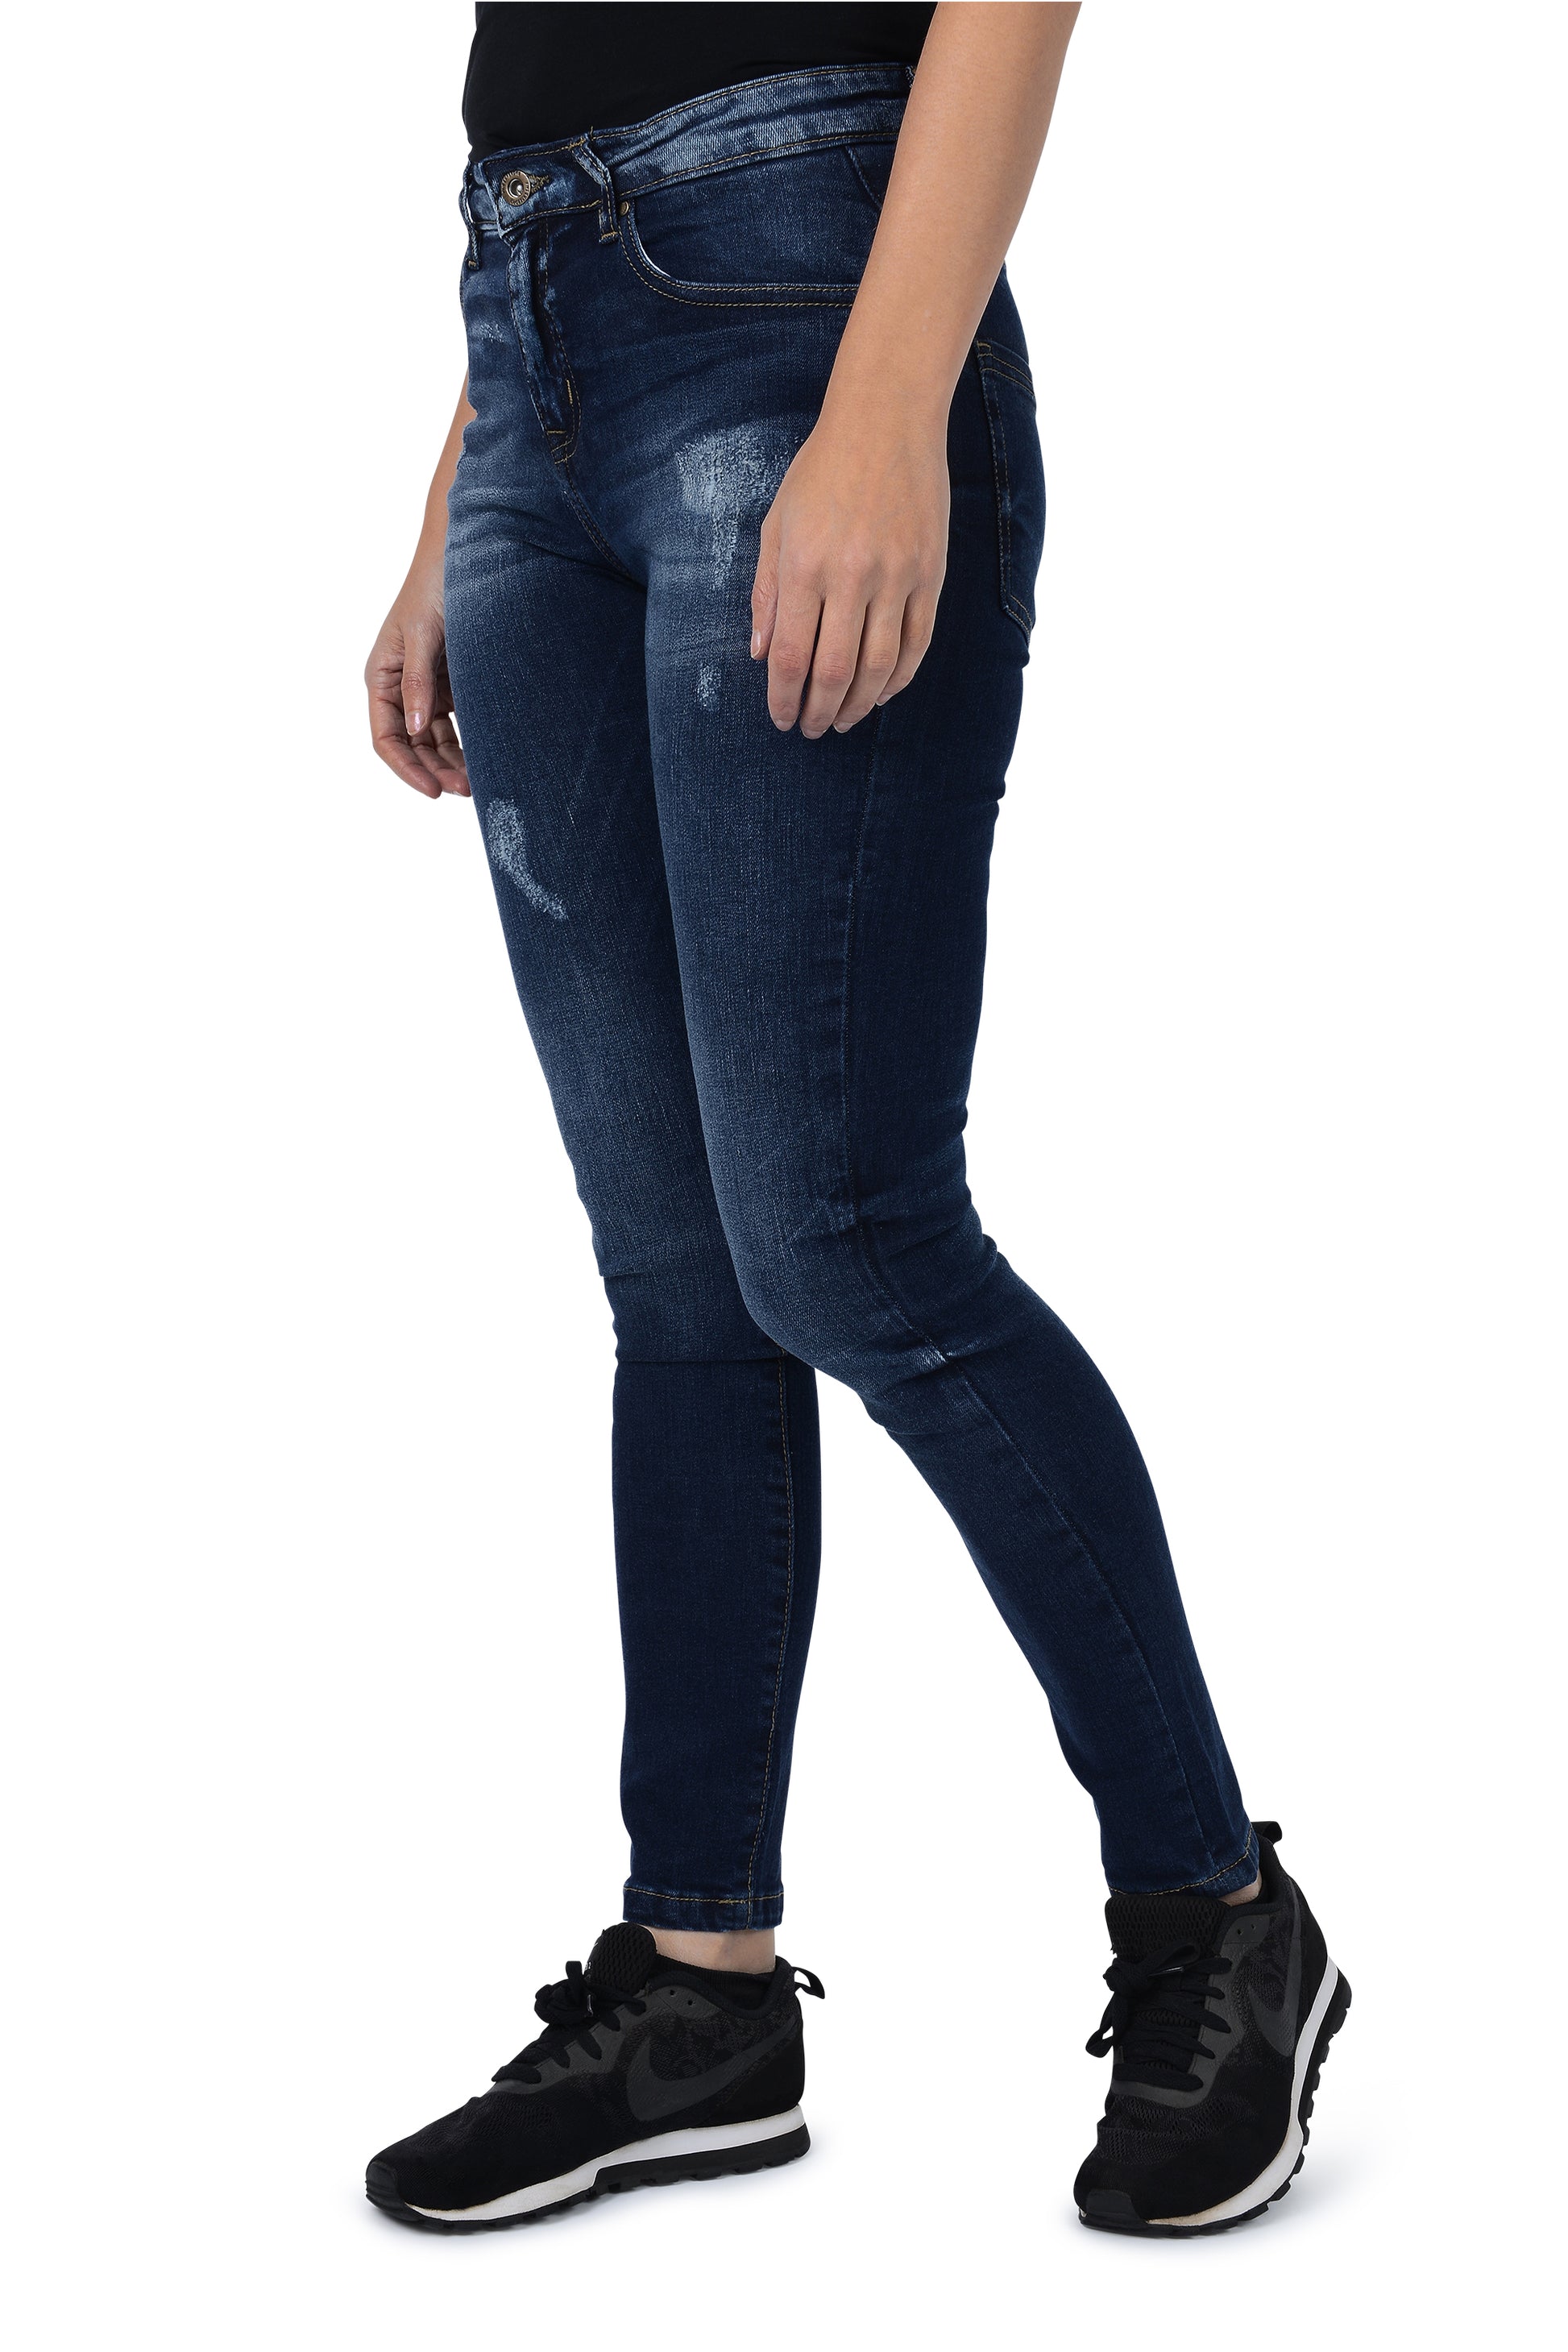 Classic Mid Rise Fit Skinny Jeans – Deep Blue